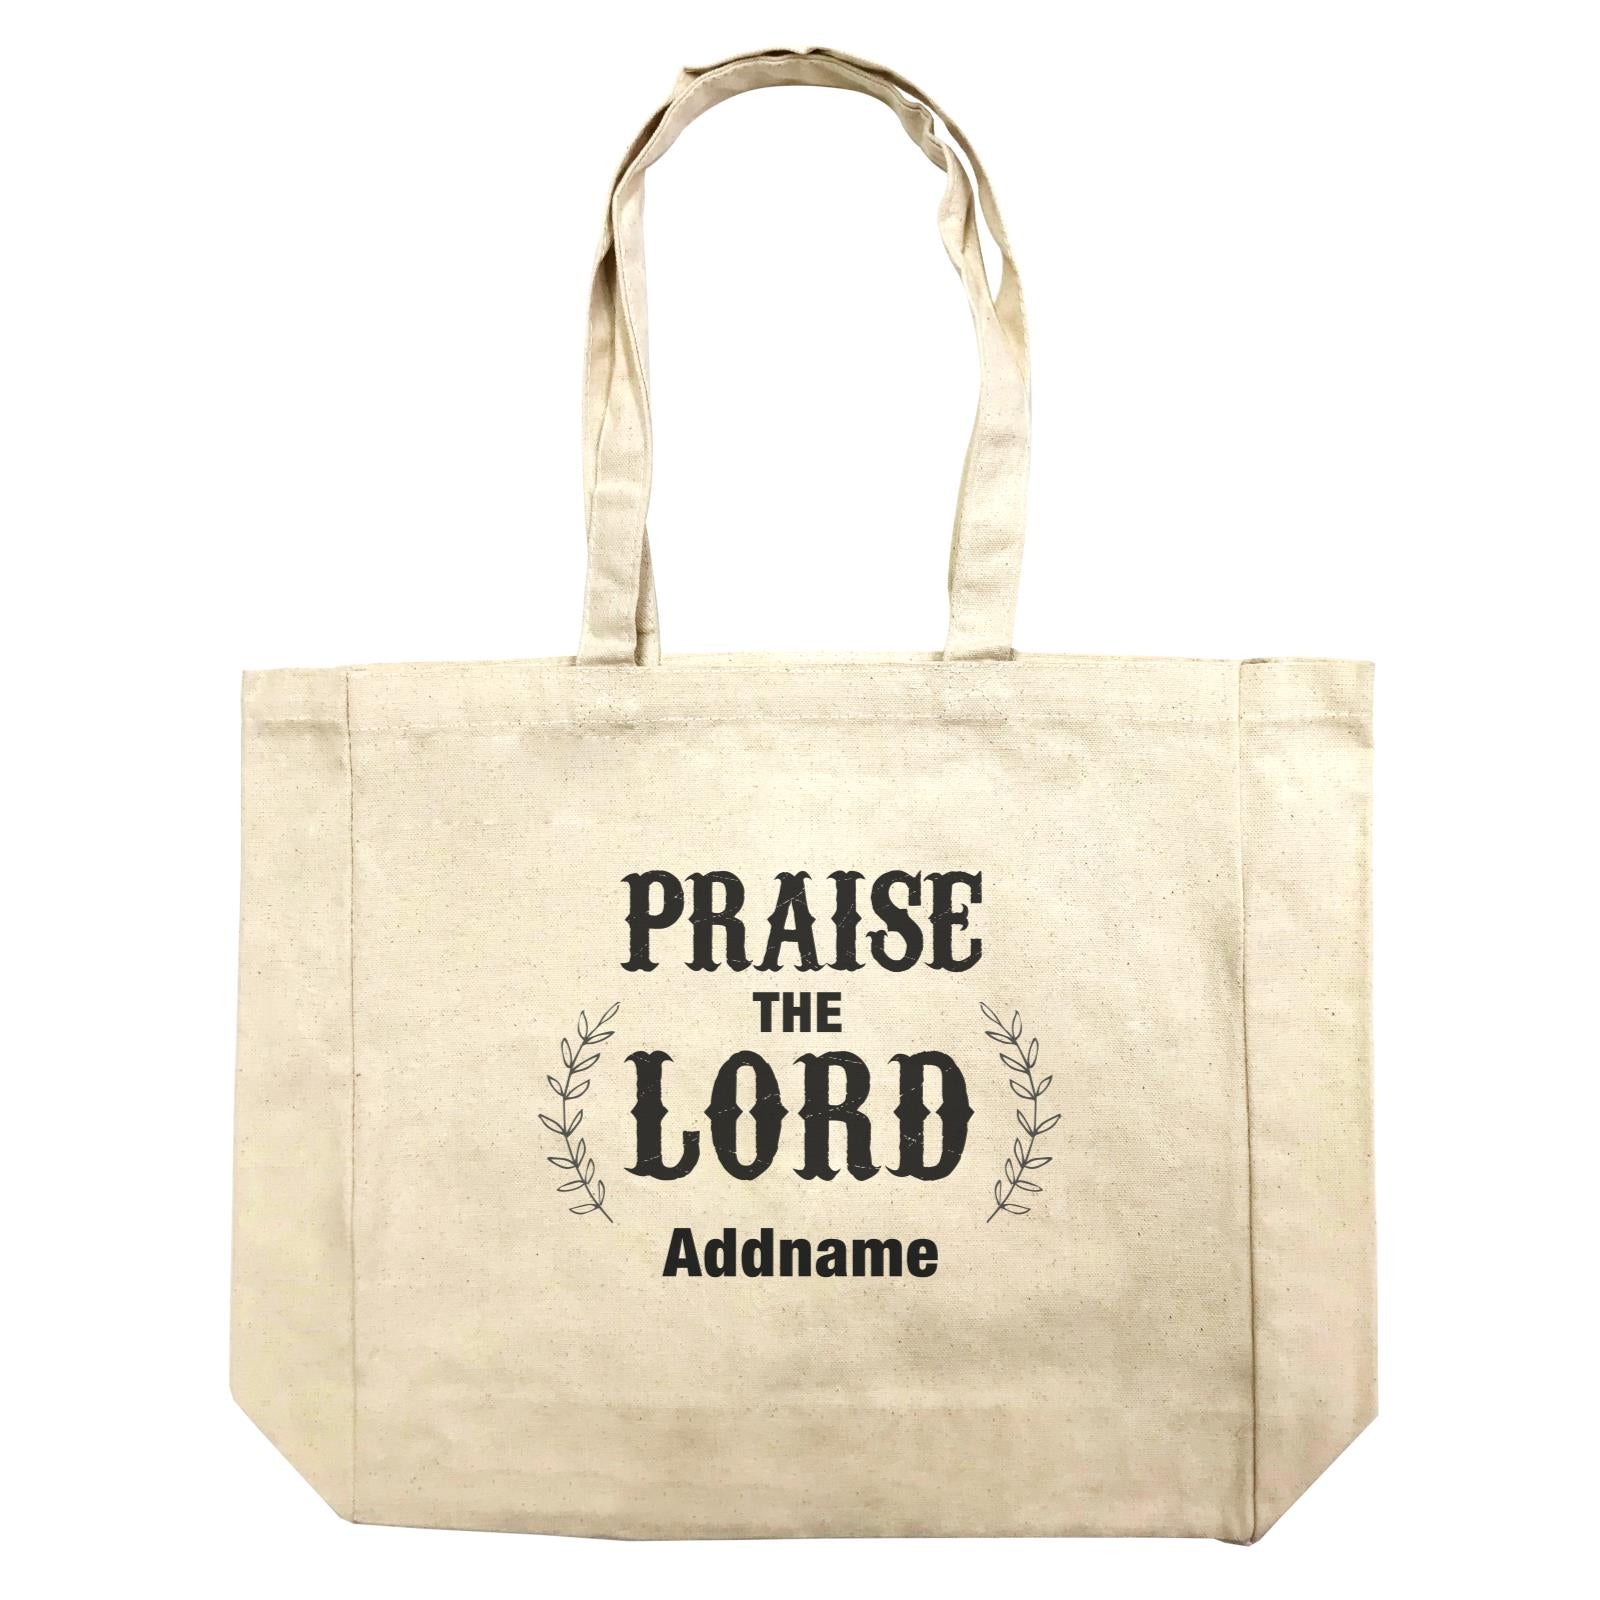 Christian Series Praise The Lord Addname Shopping Bag